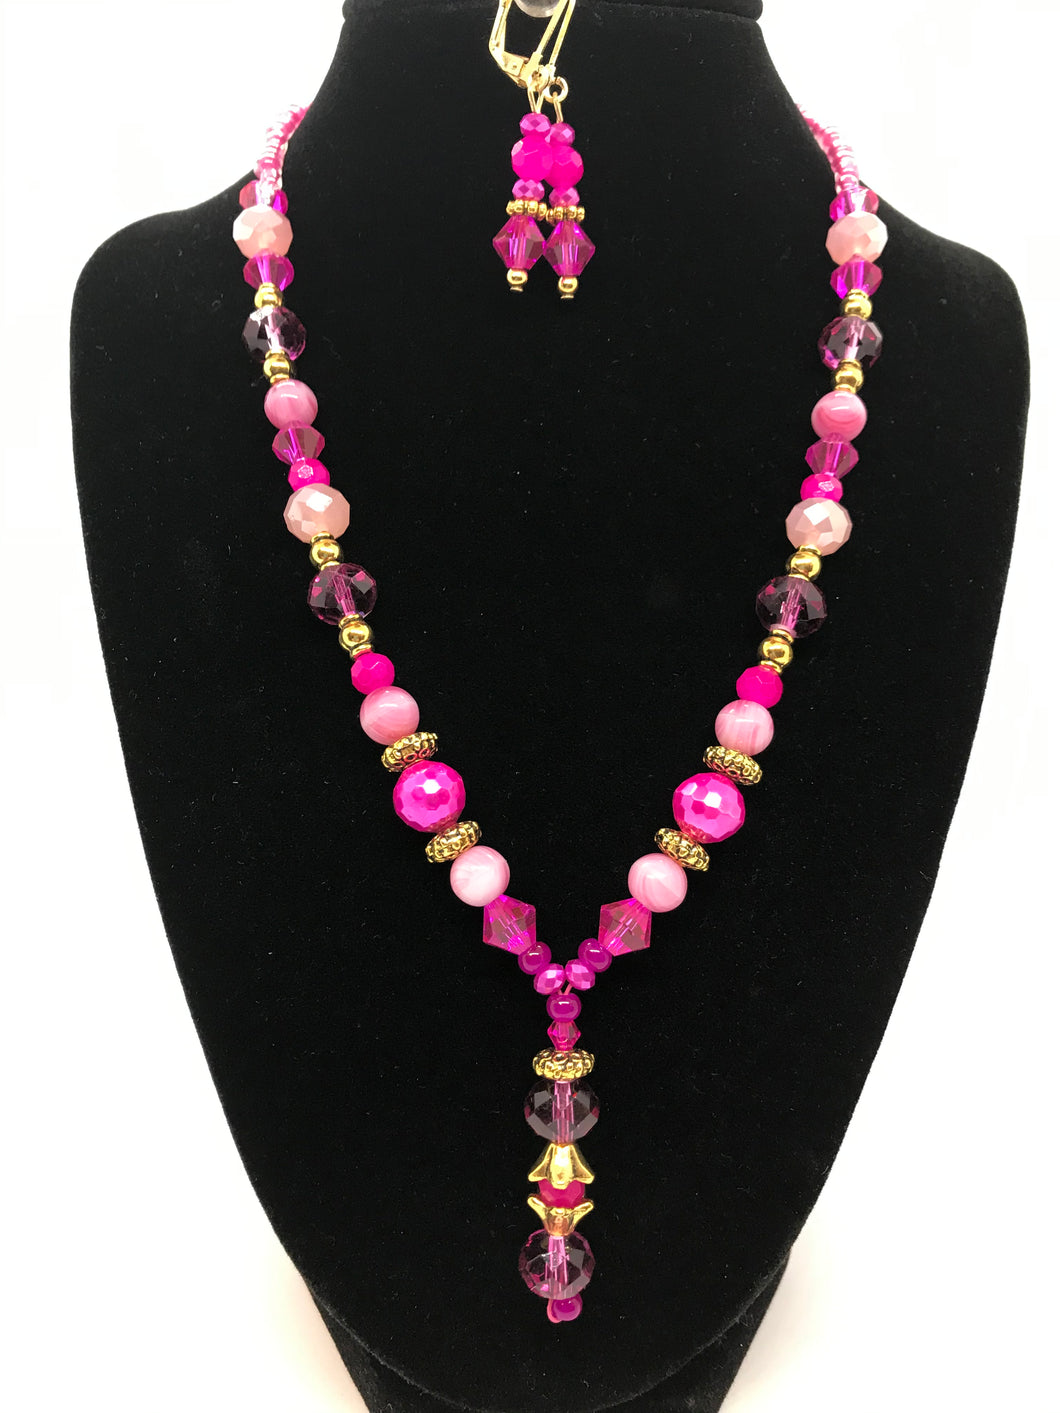 Hot pink necklace with dangling focal piece, matching earrings.